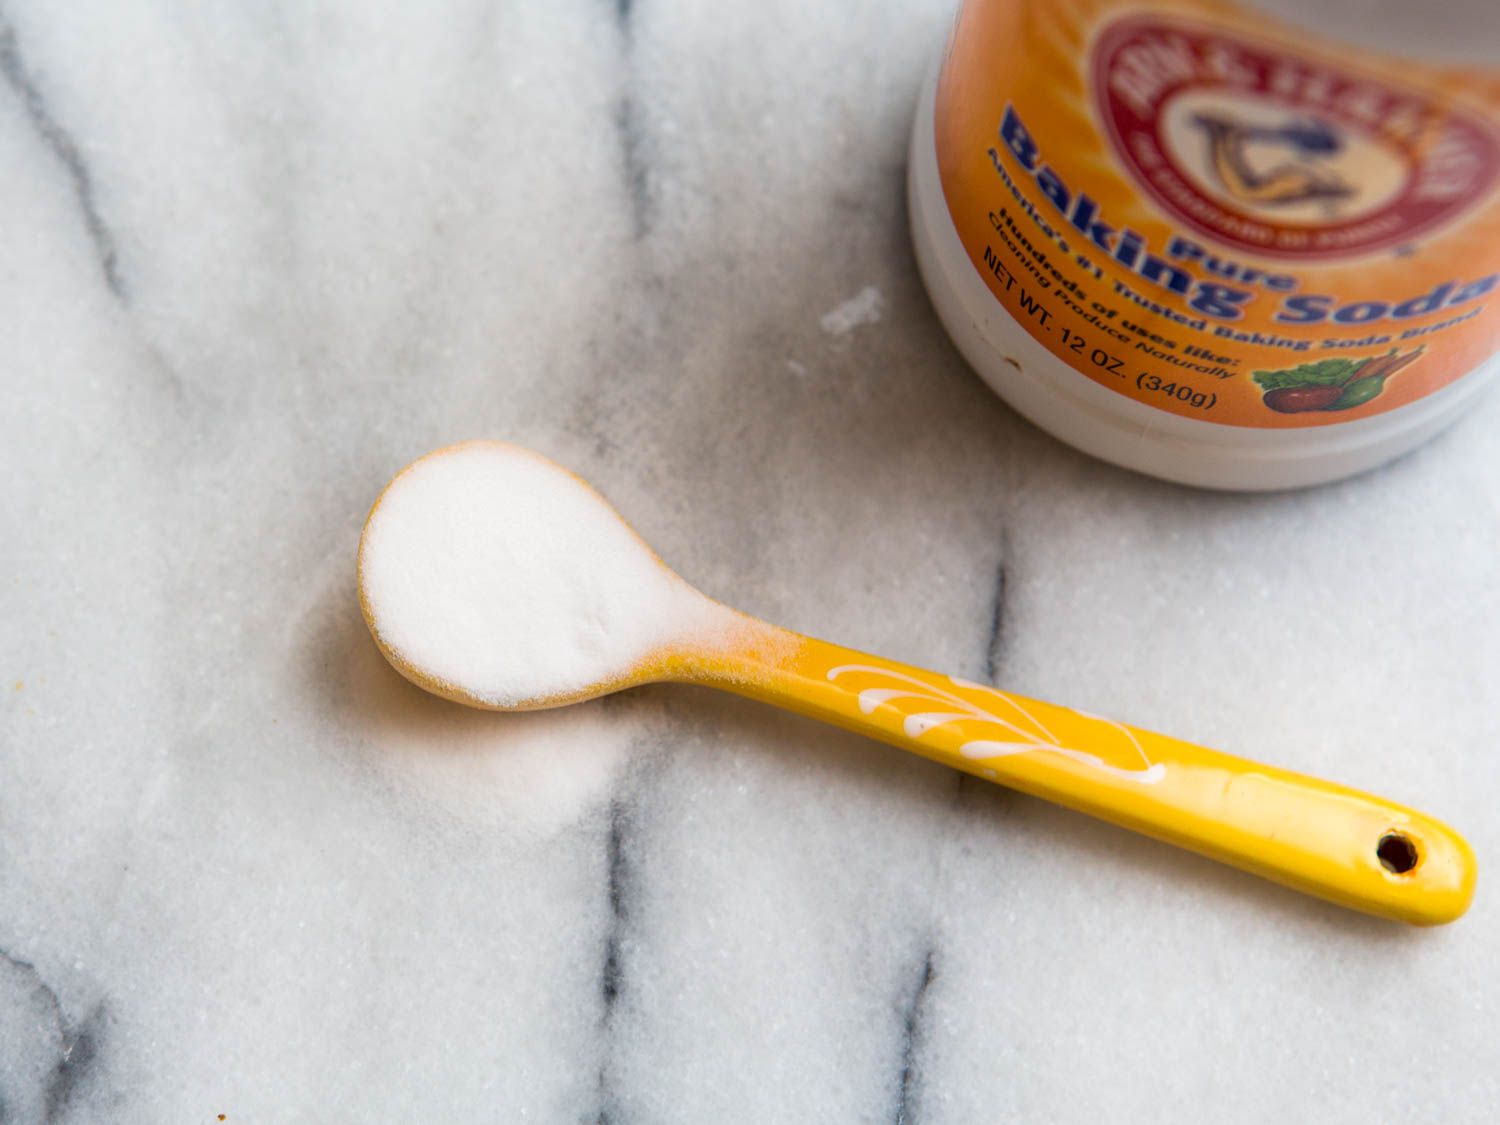 A yellow spoon holding baking soda with a container of baking soda next to it.